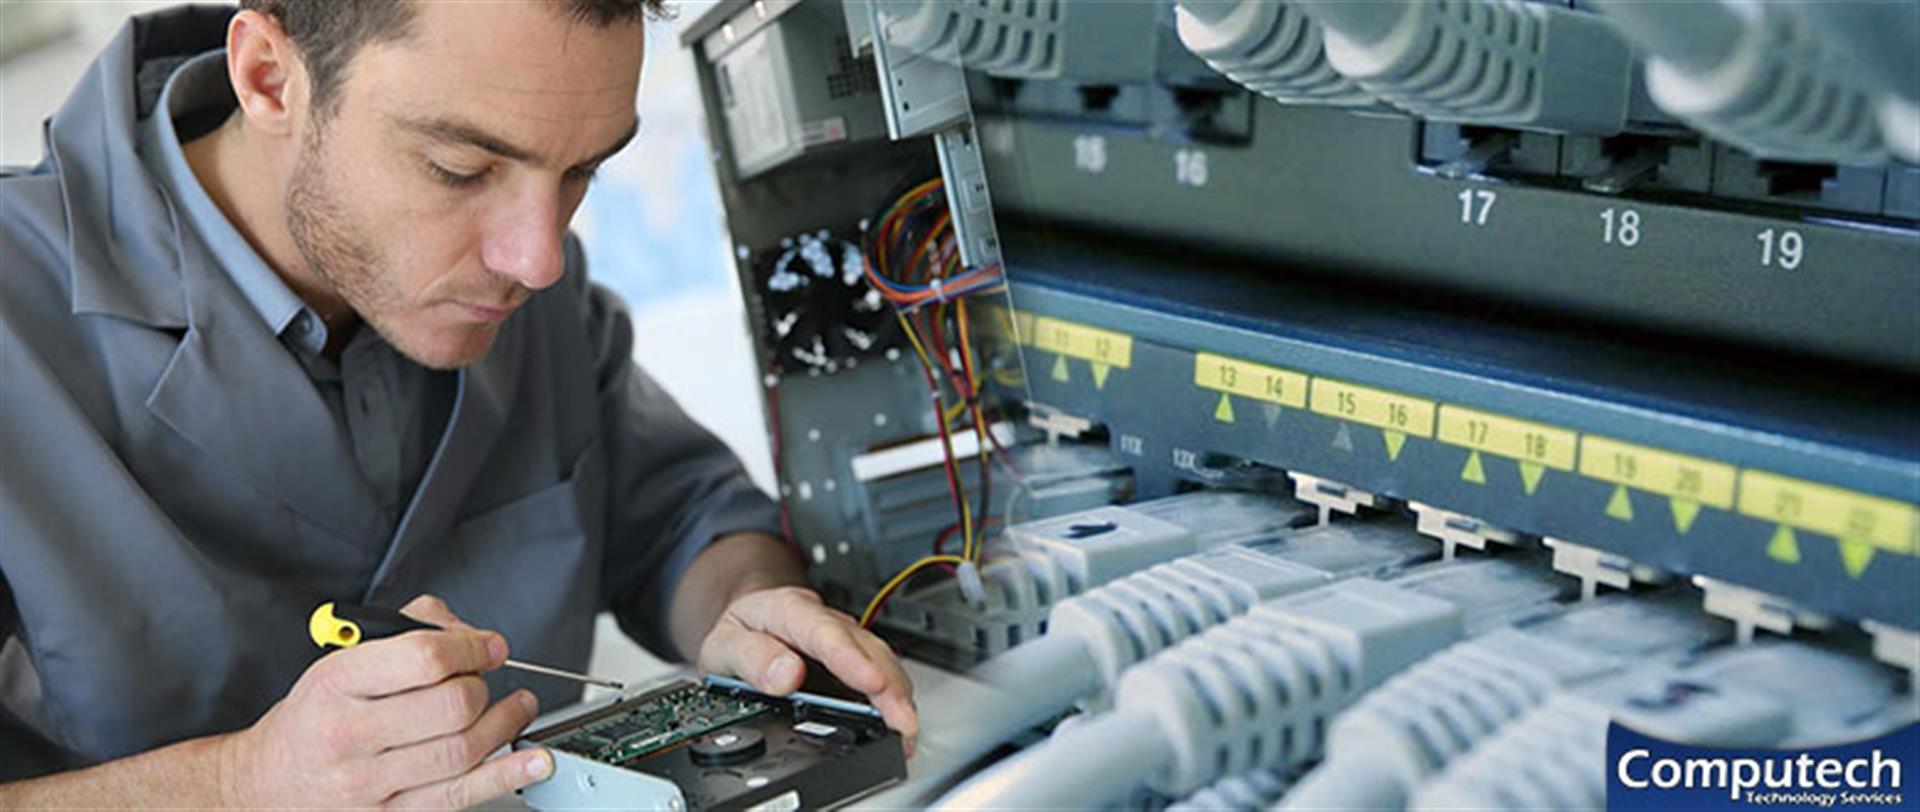 Yuma Arizona On-Site PC & Printer Repairs, Network, Telecom and Data Low Voltage Cabling Services